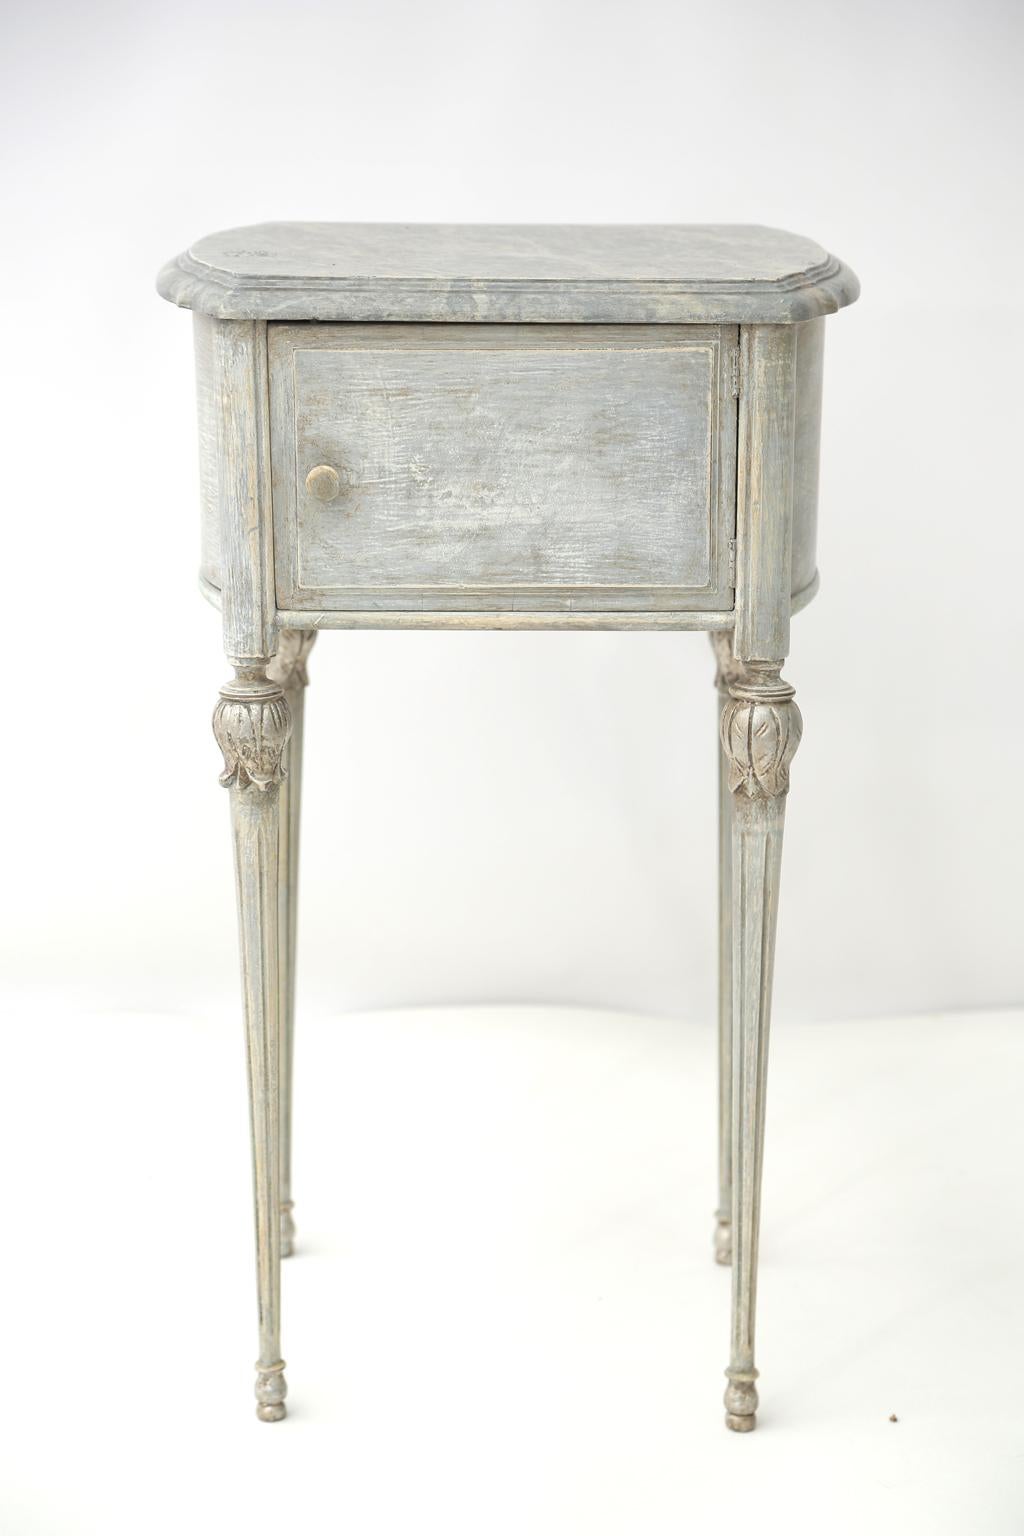 Wood Painted French Pot Stand Side Table For Sale